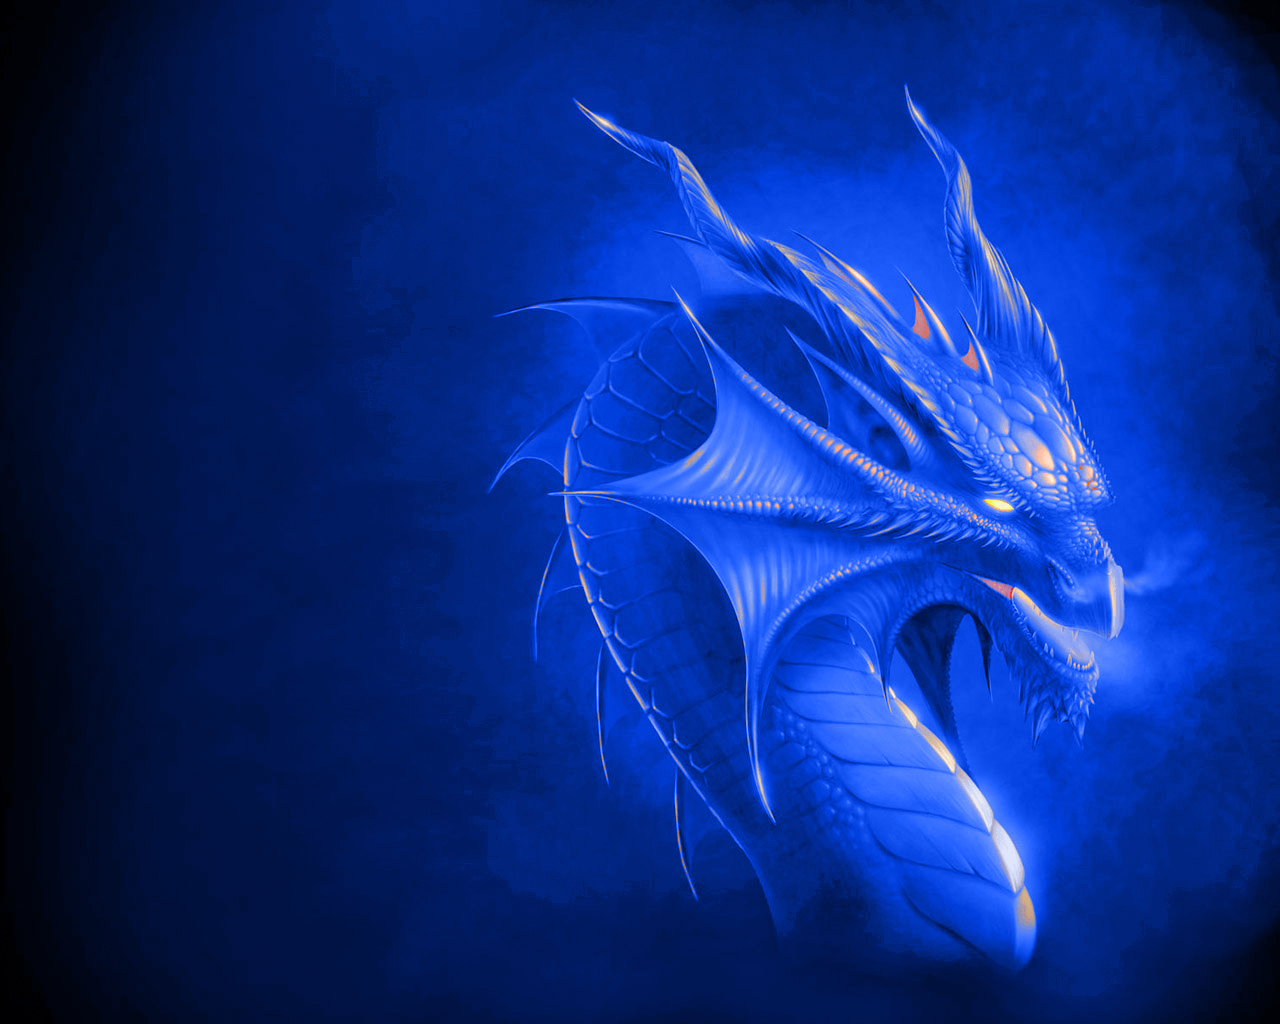 Gallery For gt Blue Dragon Wallpaper